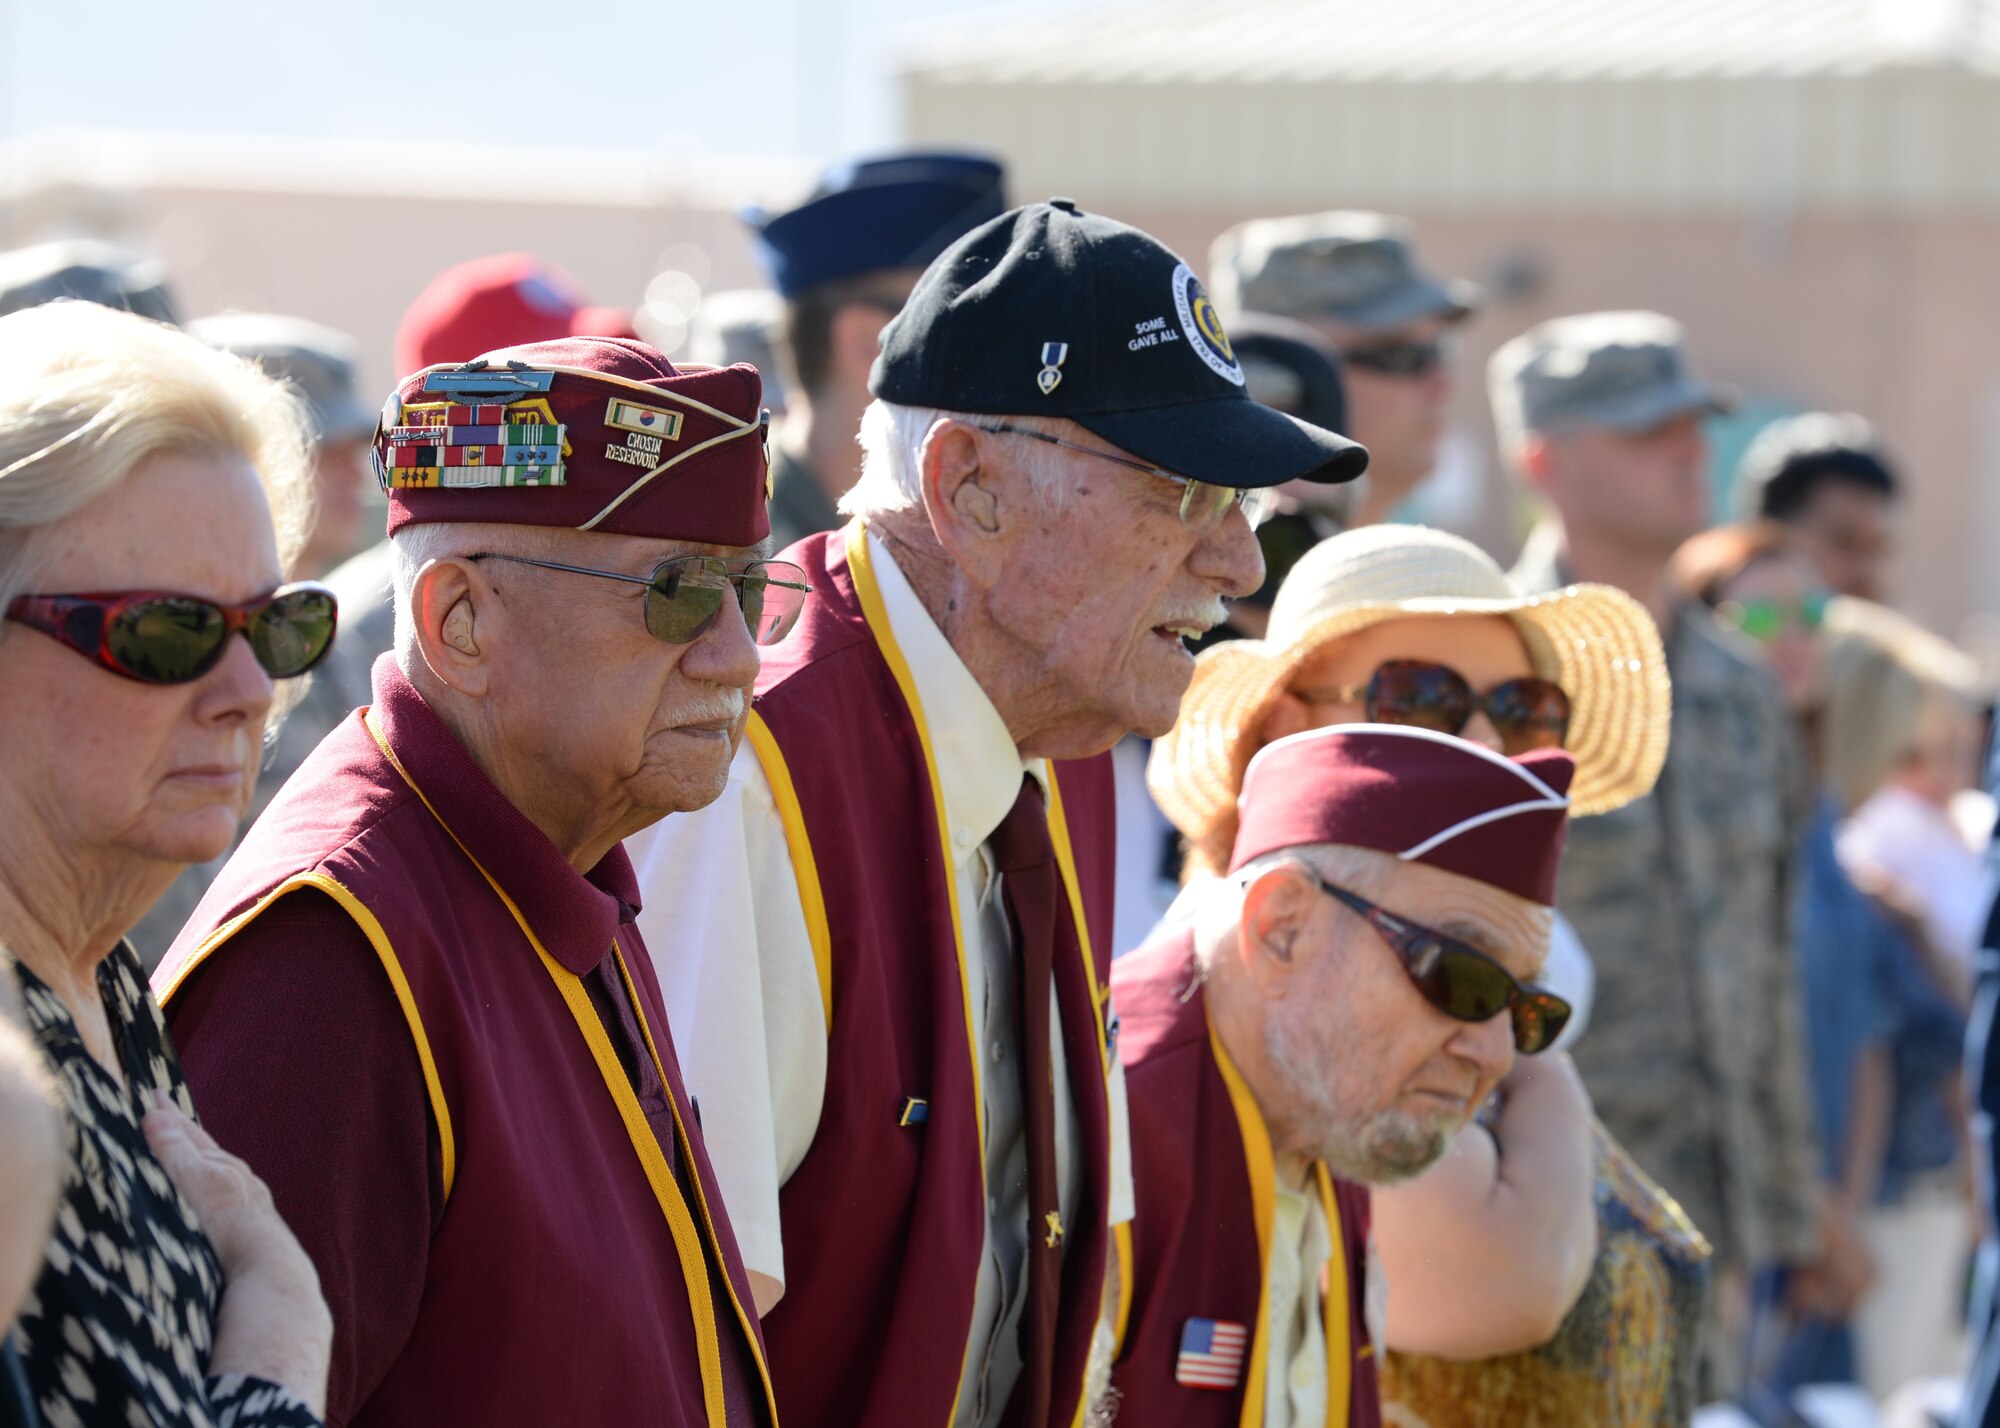 Prisoners of war and their family members stand during the POW/Missing in Action ceremony in Freedom Park on Nellis Air Force Base, Nev., Sept. 21, 2018.  Five former POWs and six formally MIA service members that were recently returned home, were honored at the ceremony. (U.S. Air Force photo by Airman 1st Class Bryan T. Guthrie)